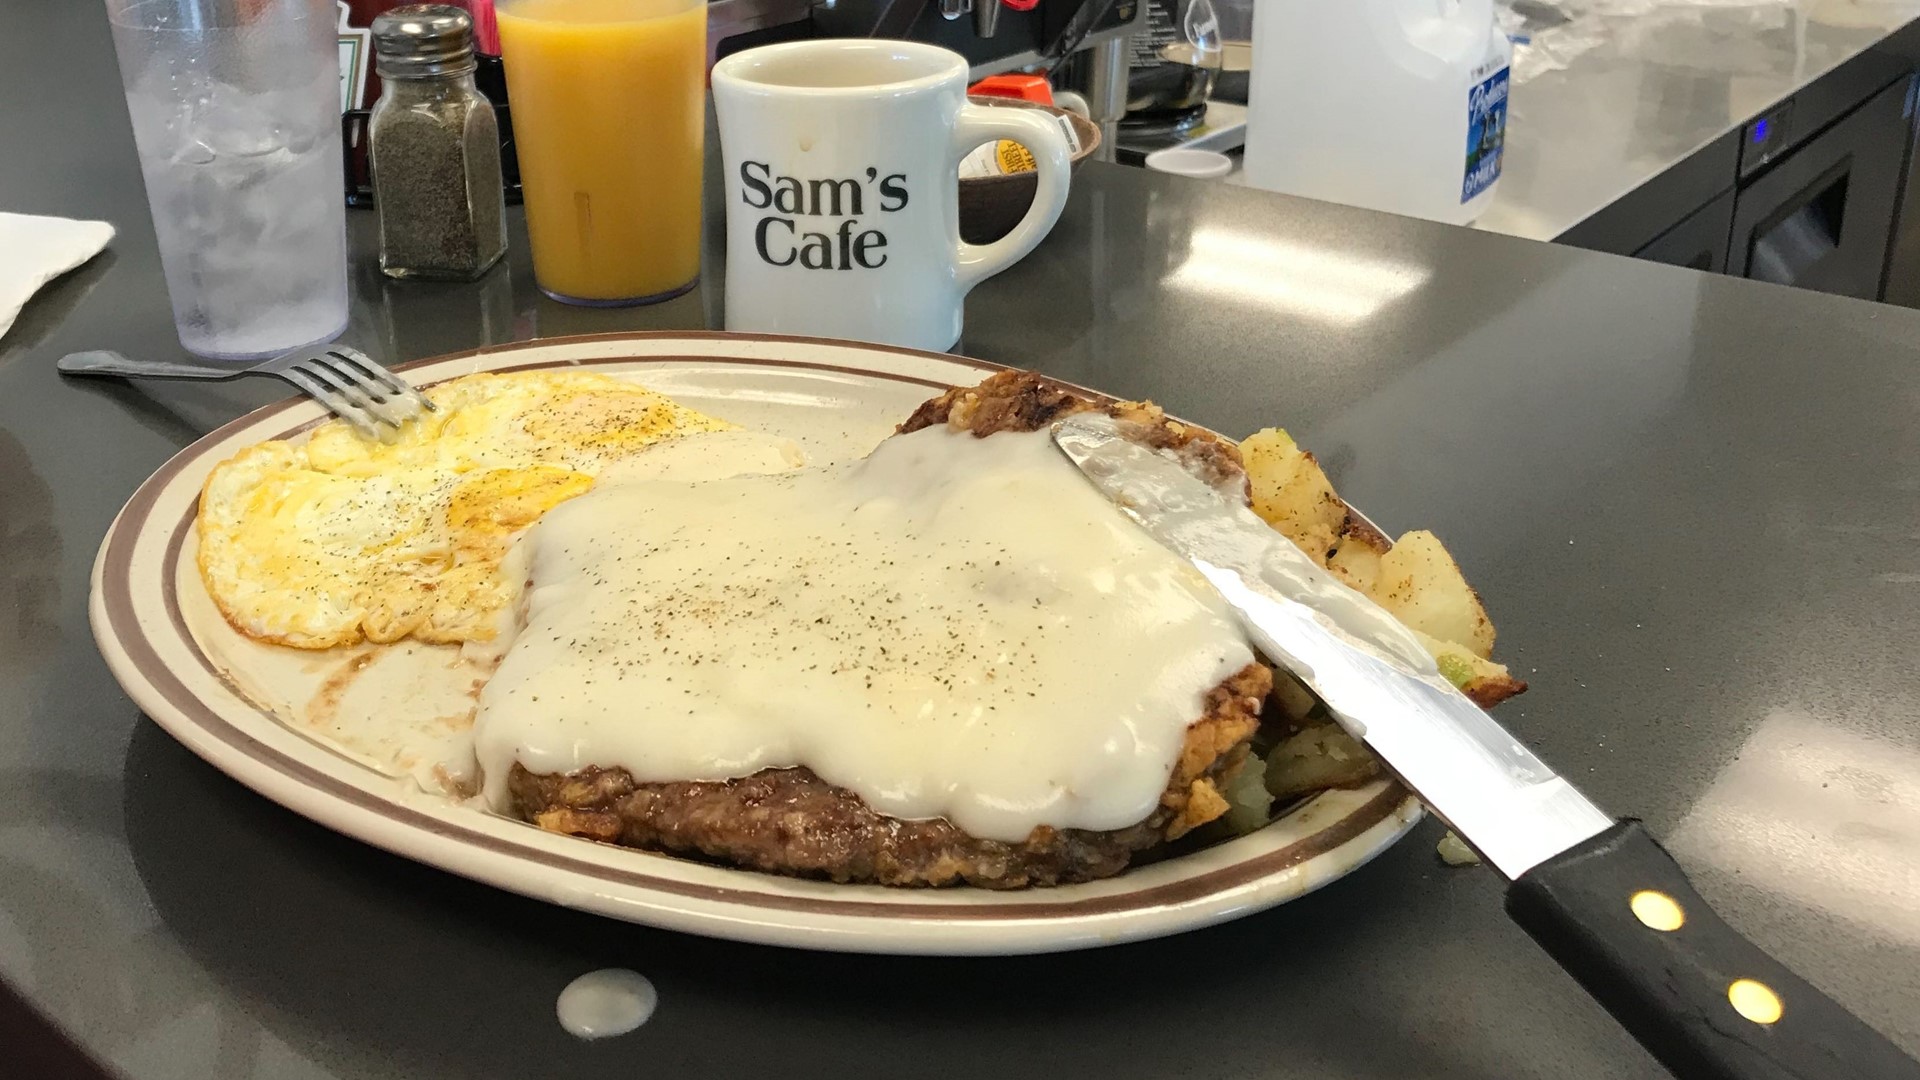 Sam's Cafe in Ceres lost everything after a devastating fire the day after Thanksgiving in 2017. It took longer than expected to recover, but on Thursday, the hometown restaurant is back open for business and ready to continue serving the community.